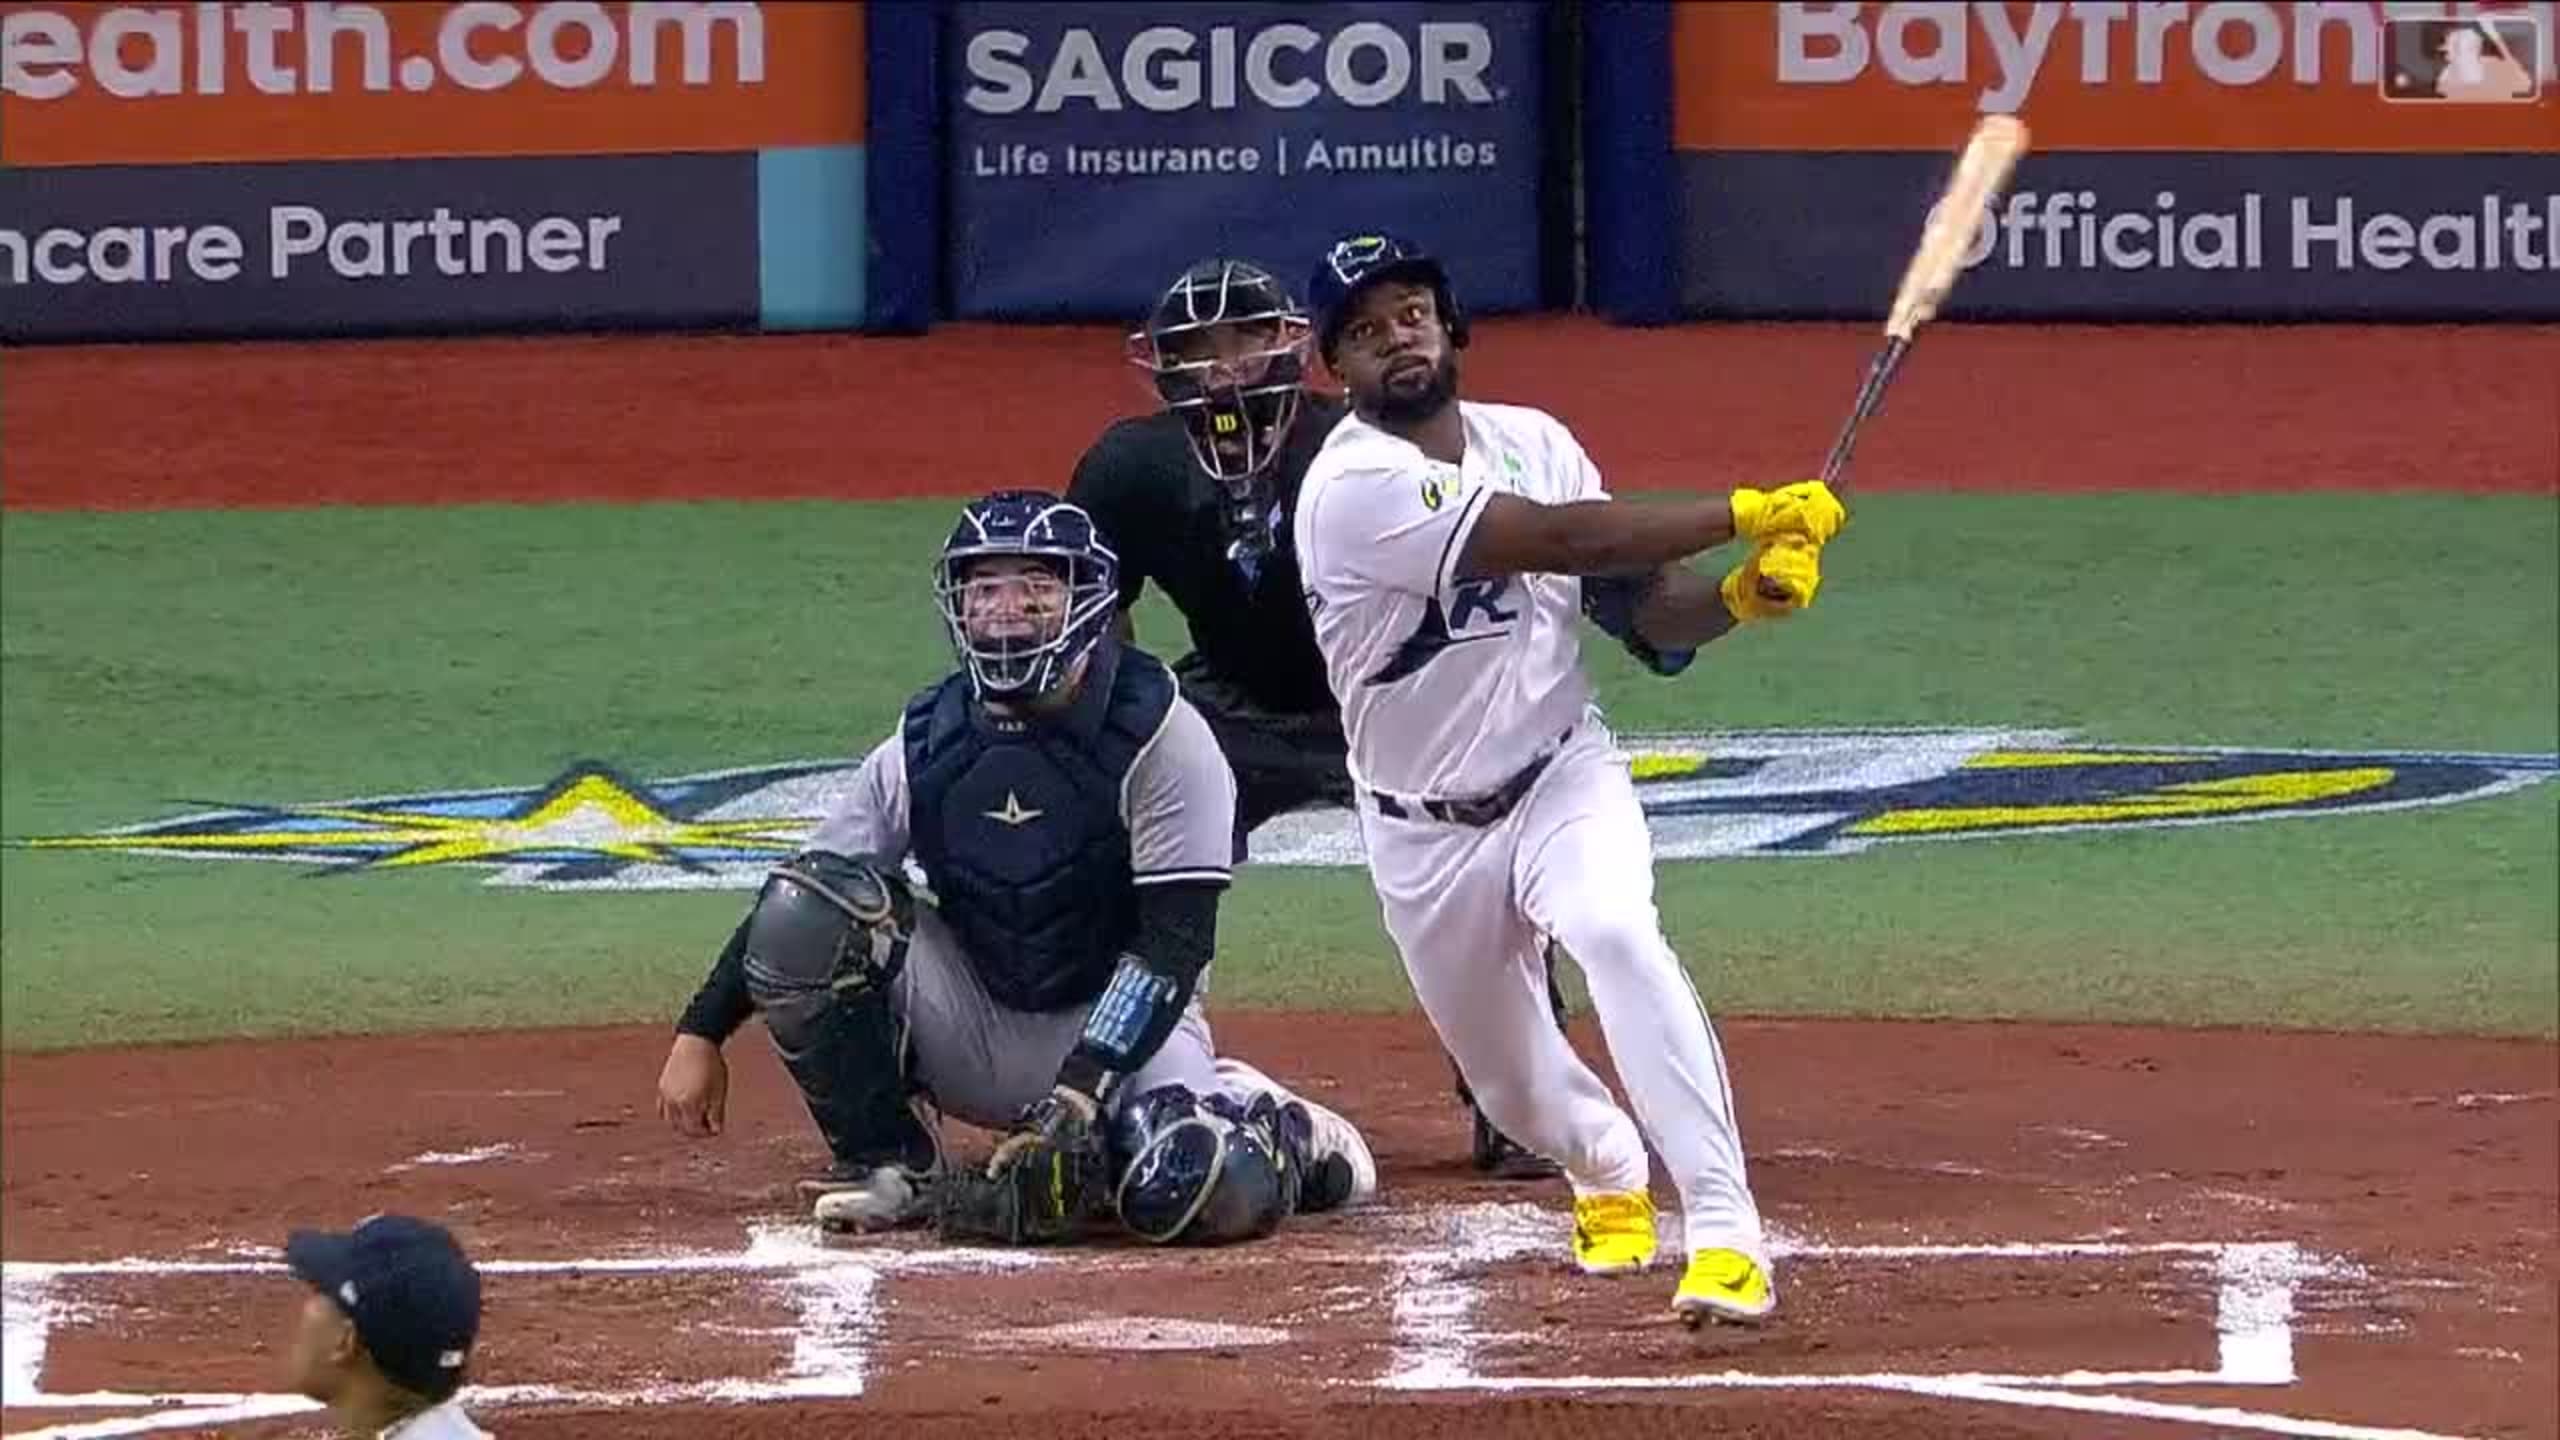 Harrison Bader ties it up with a solo home run! : r/baseball